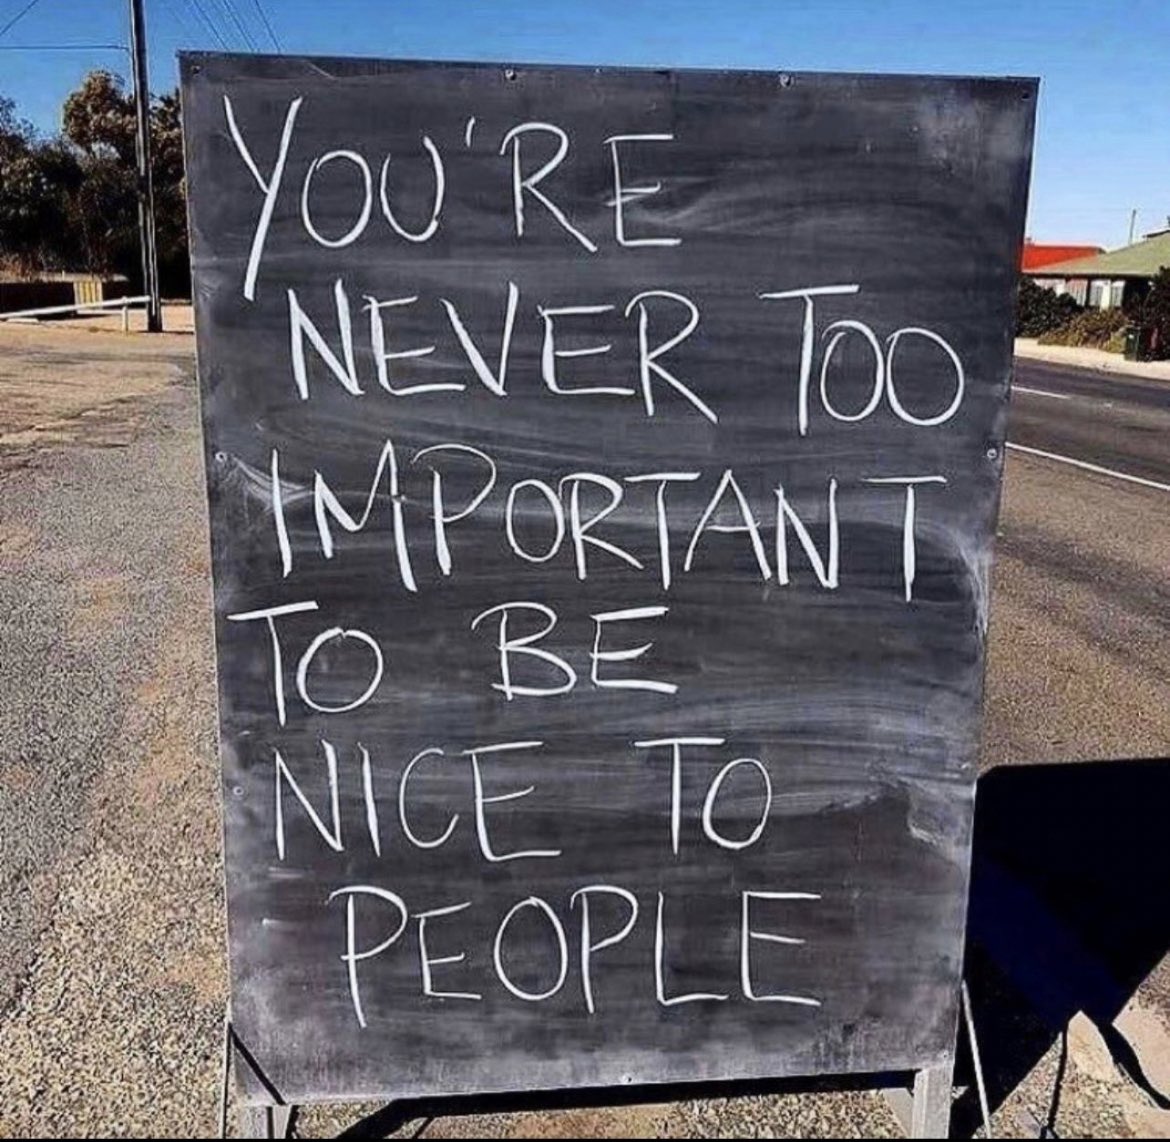 Remember, no matter how high you climb in life, your character is measured by how you treat others. 'You are never too important to be nice to people.' Let's make kindness our default setting. #KindnessMatters #BeNice #Kindness